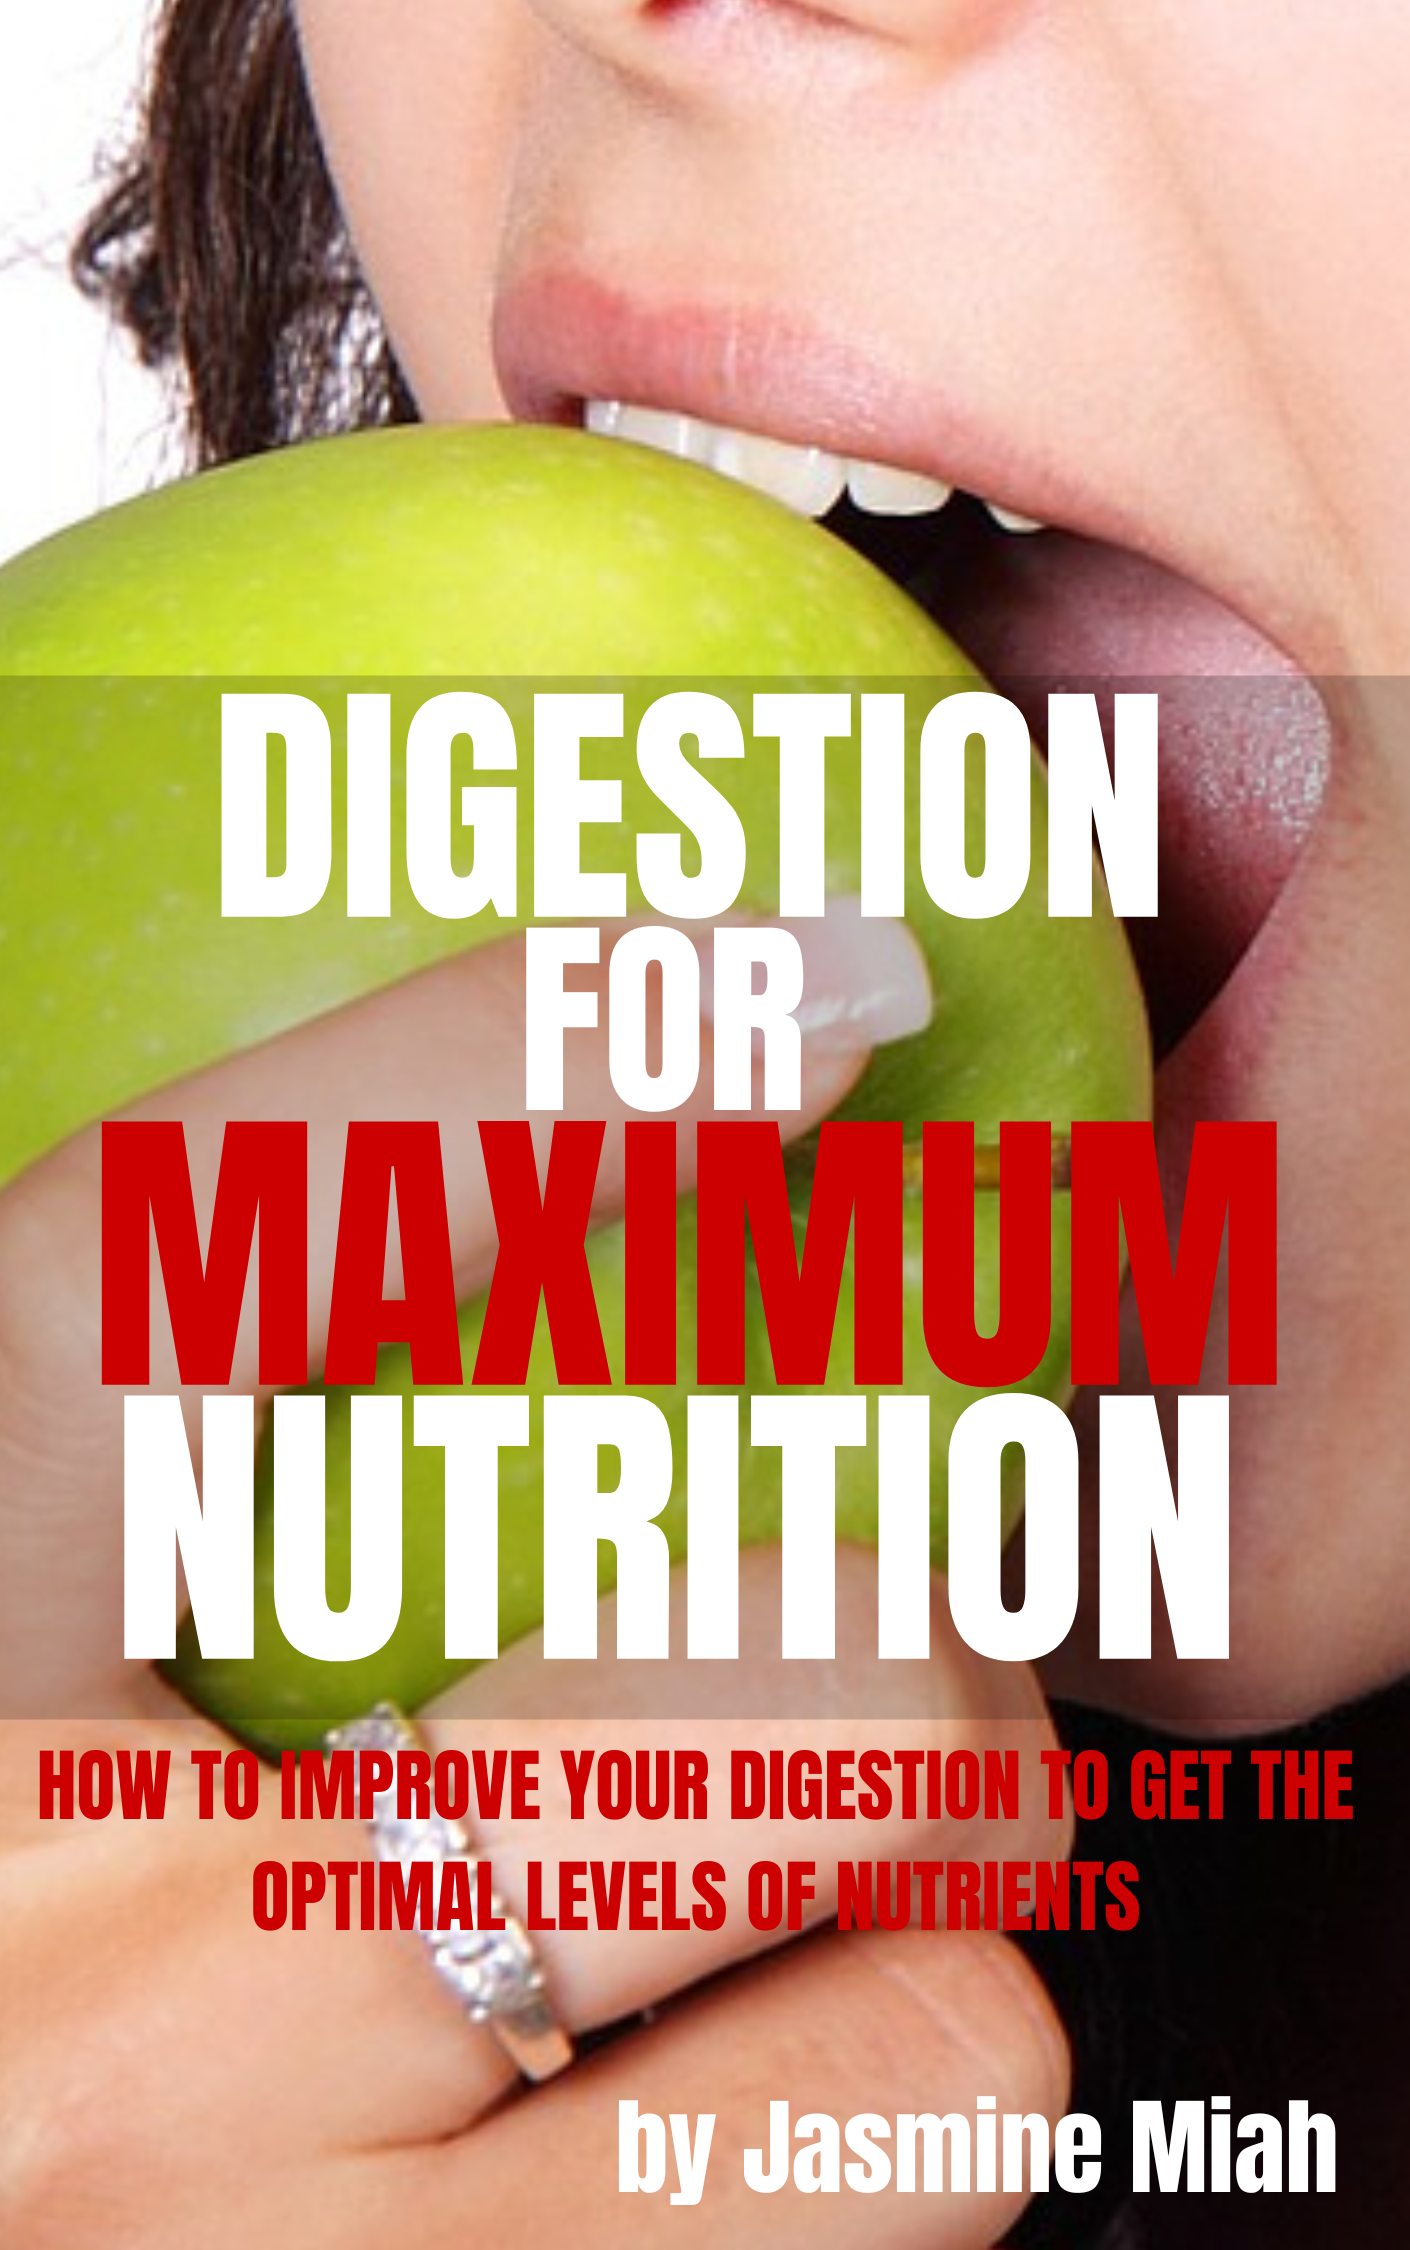 Digestion for MAXIMUM Nutrition